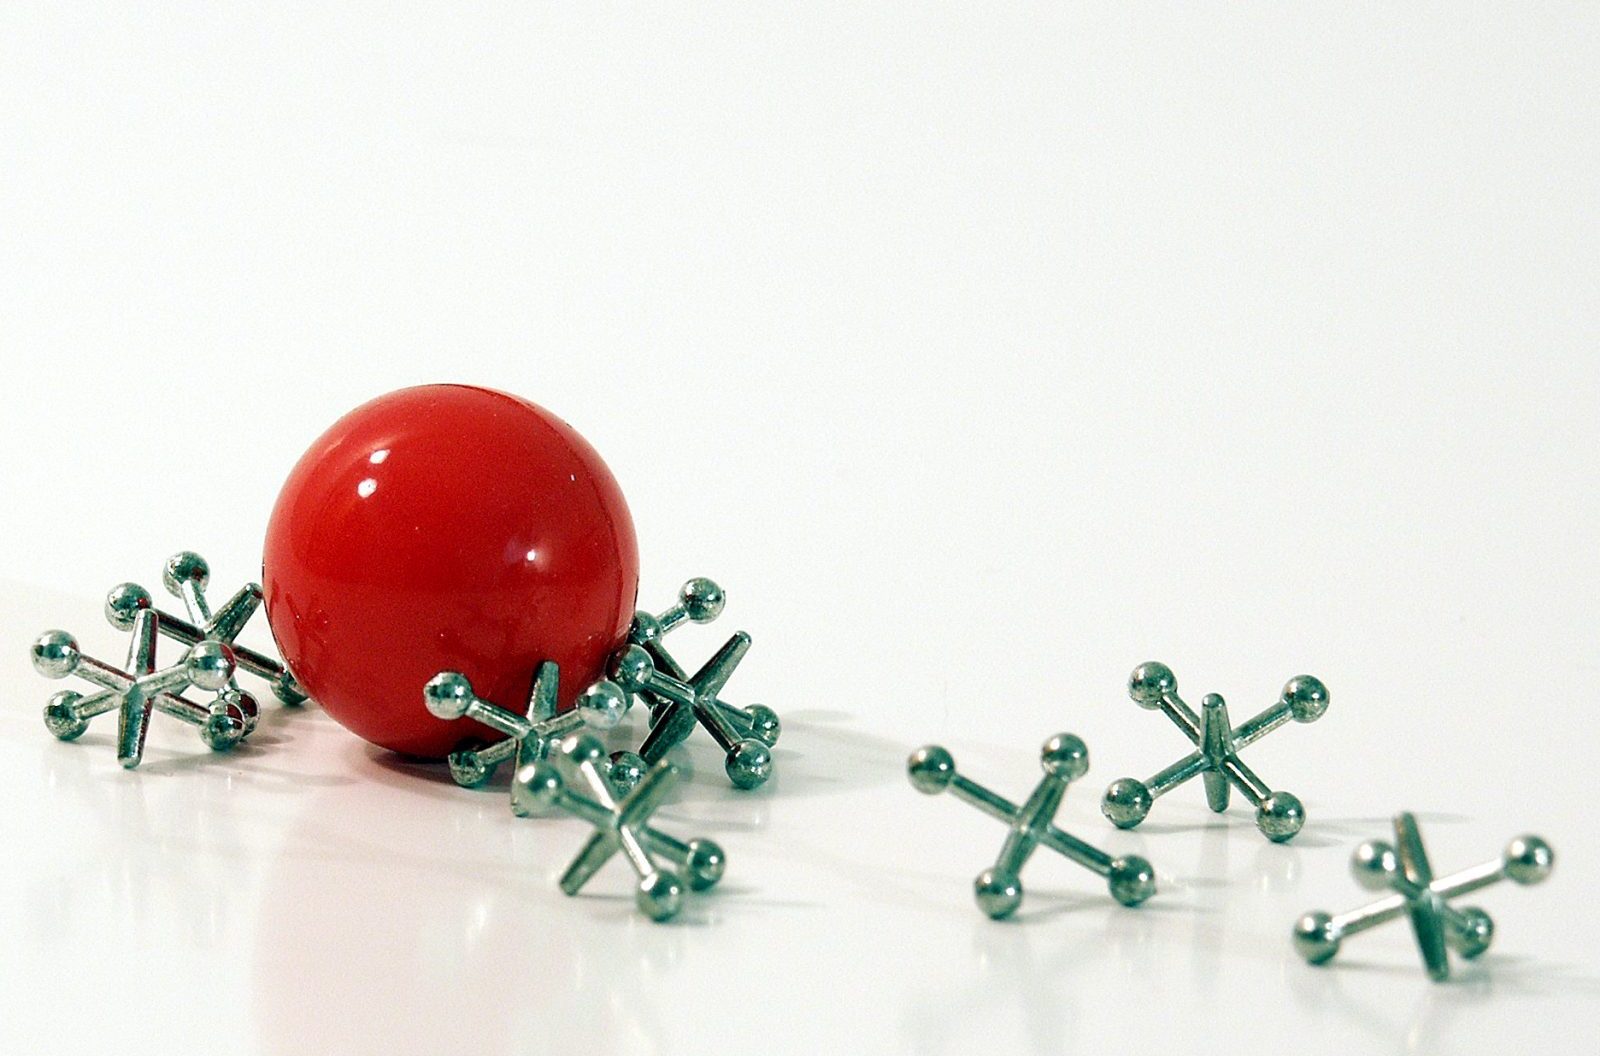 A small, shiny red ball with several metal jacks on a white background.